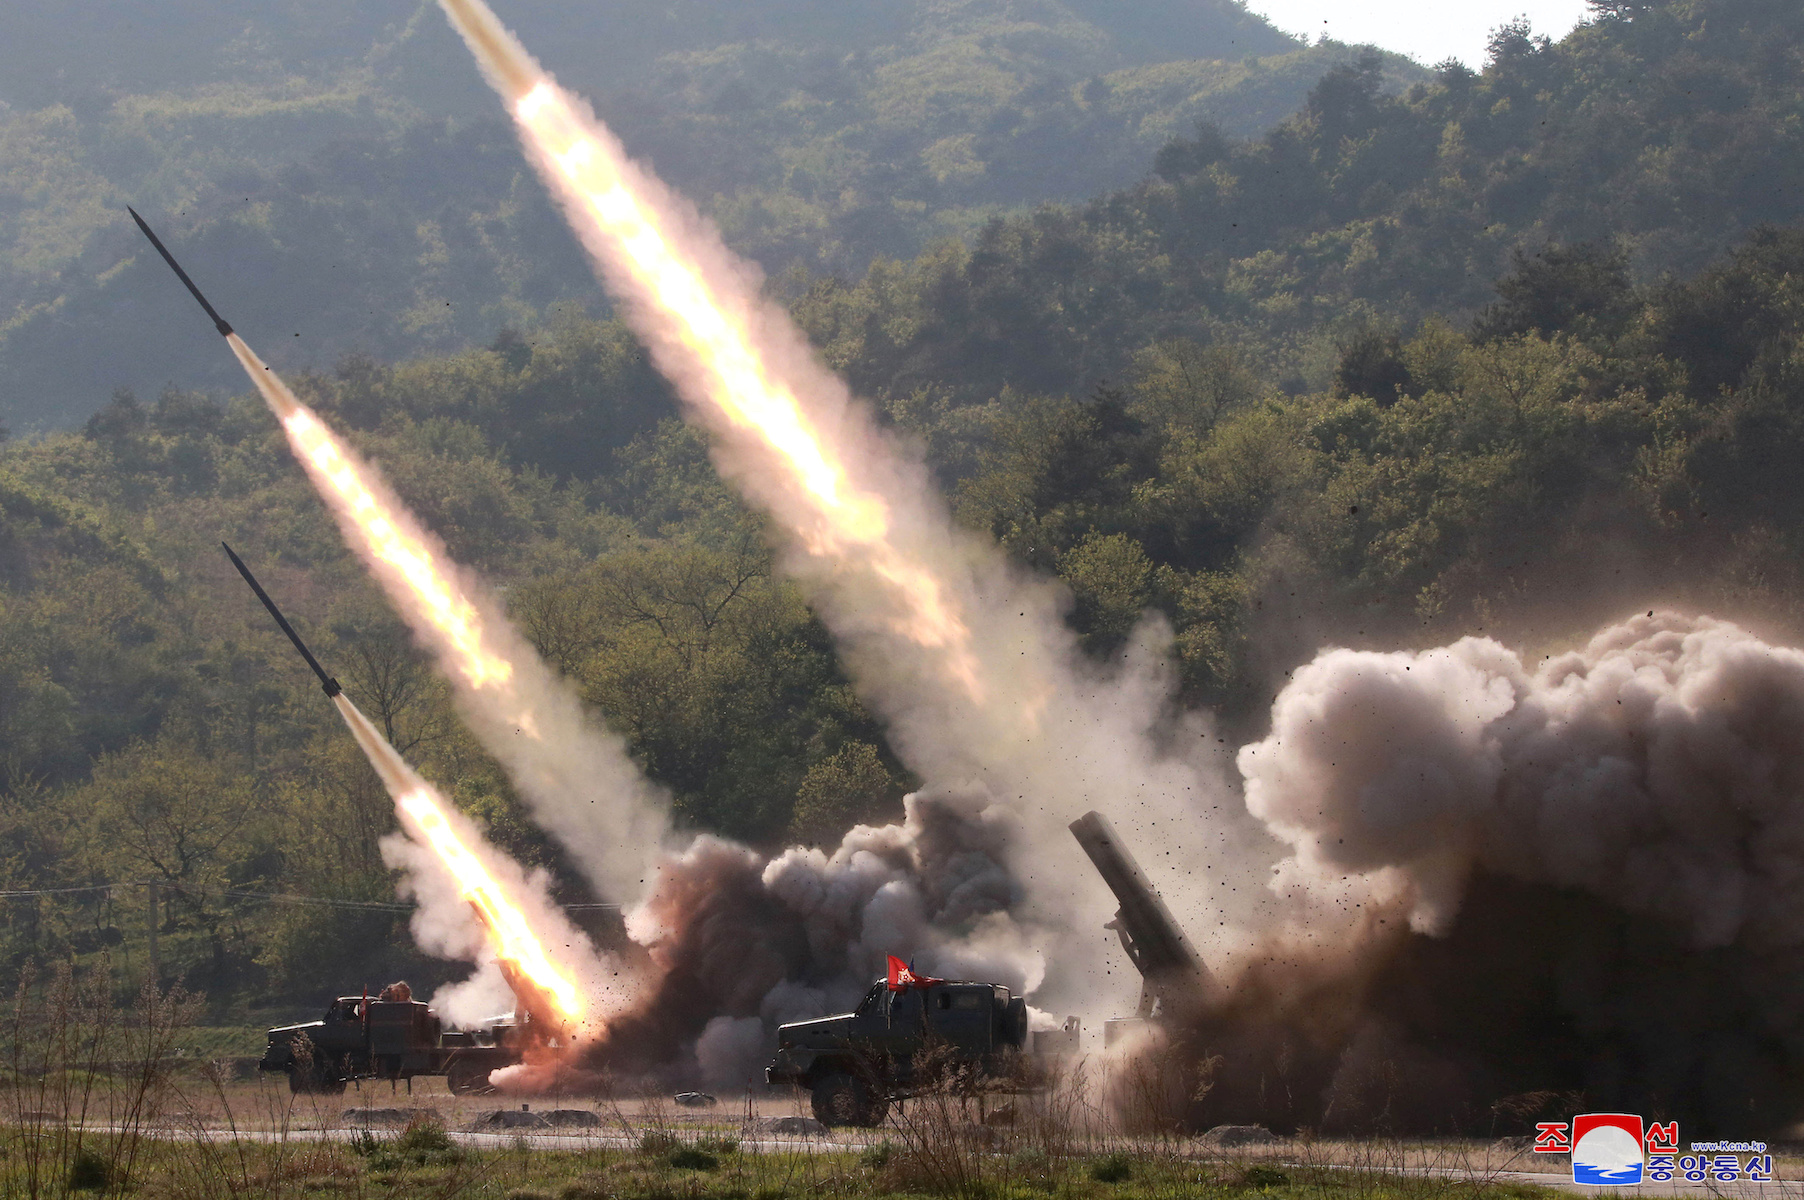 North Korea launched two ballistic missiles into waters off its eastern coa...